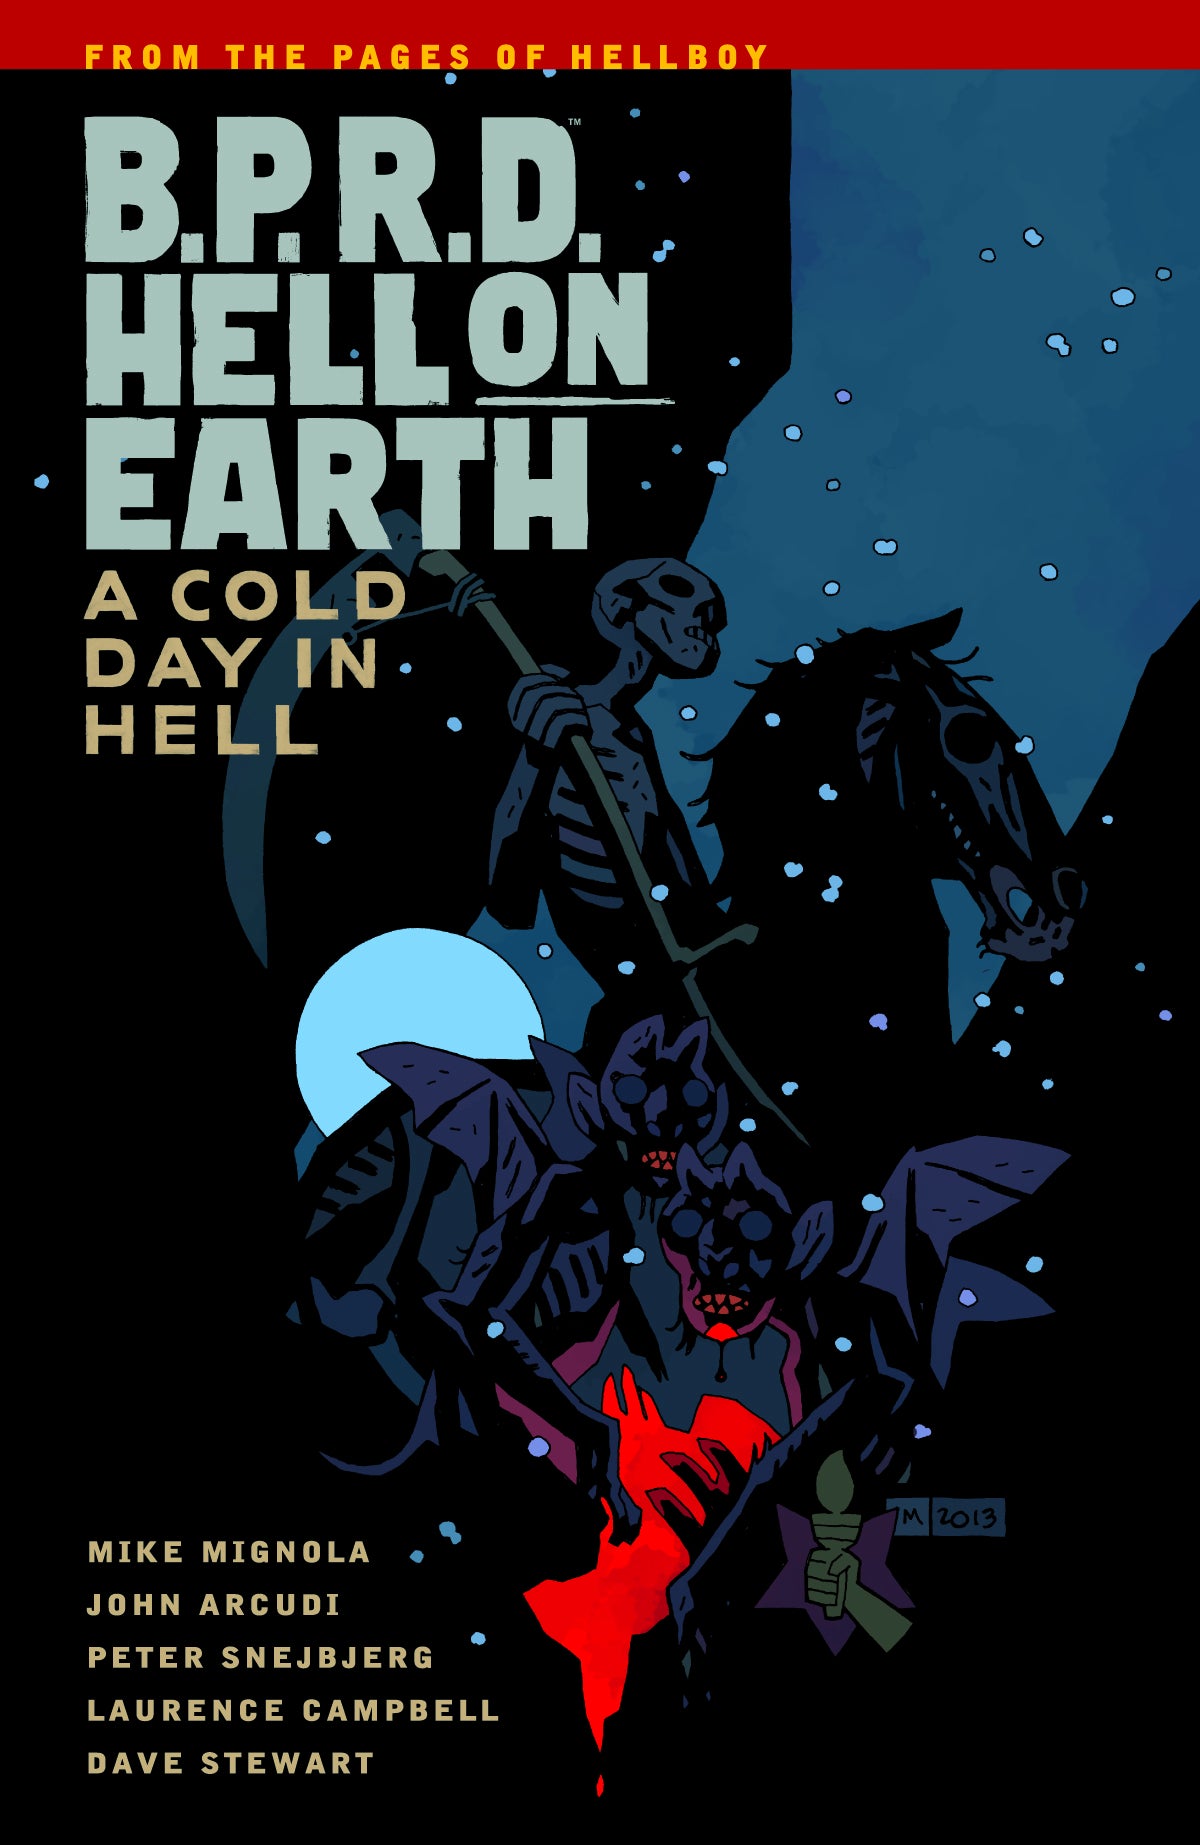 BPRD HELL ON EARTH TP VOL 07 A COLD DAY IN HELL (C: 0-1-2)